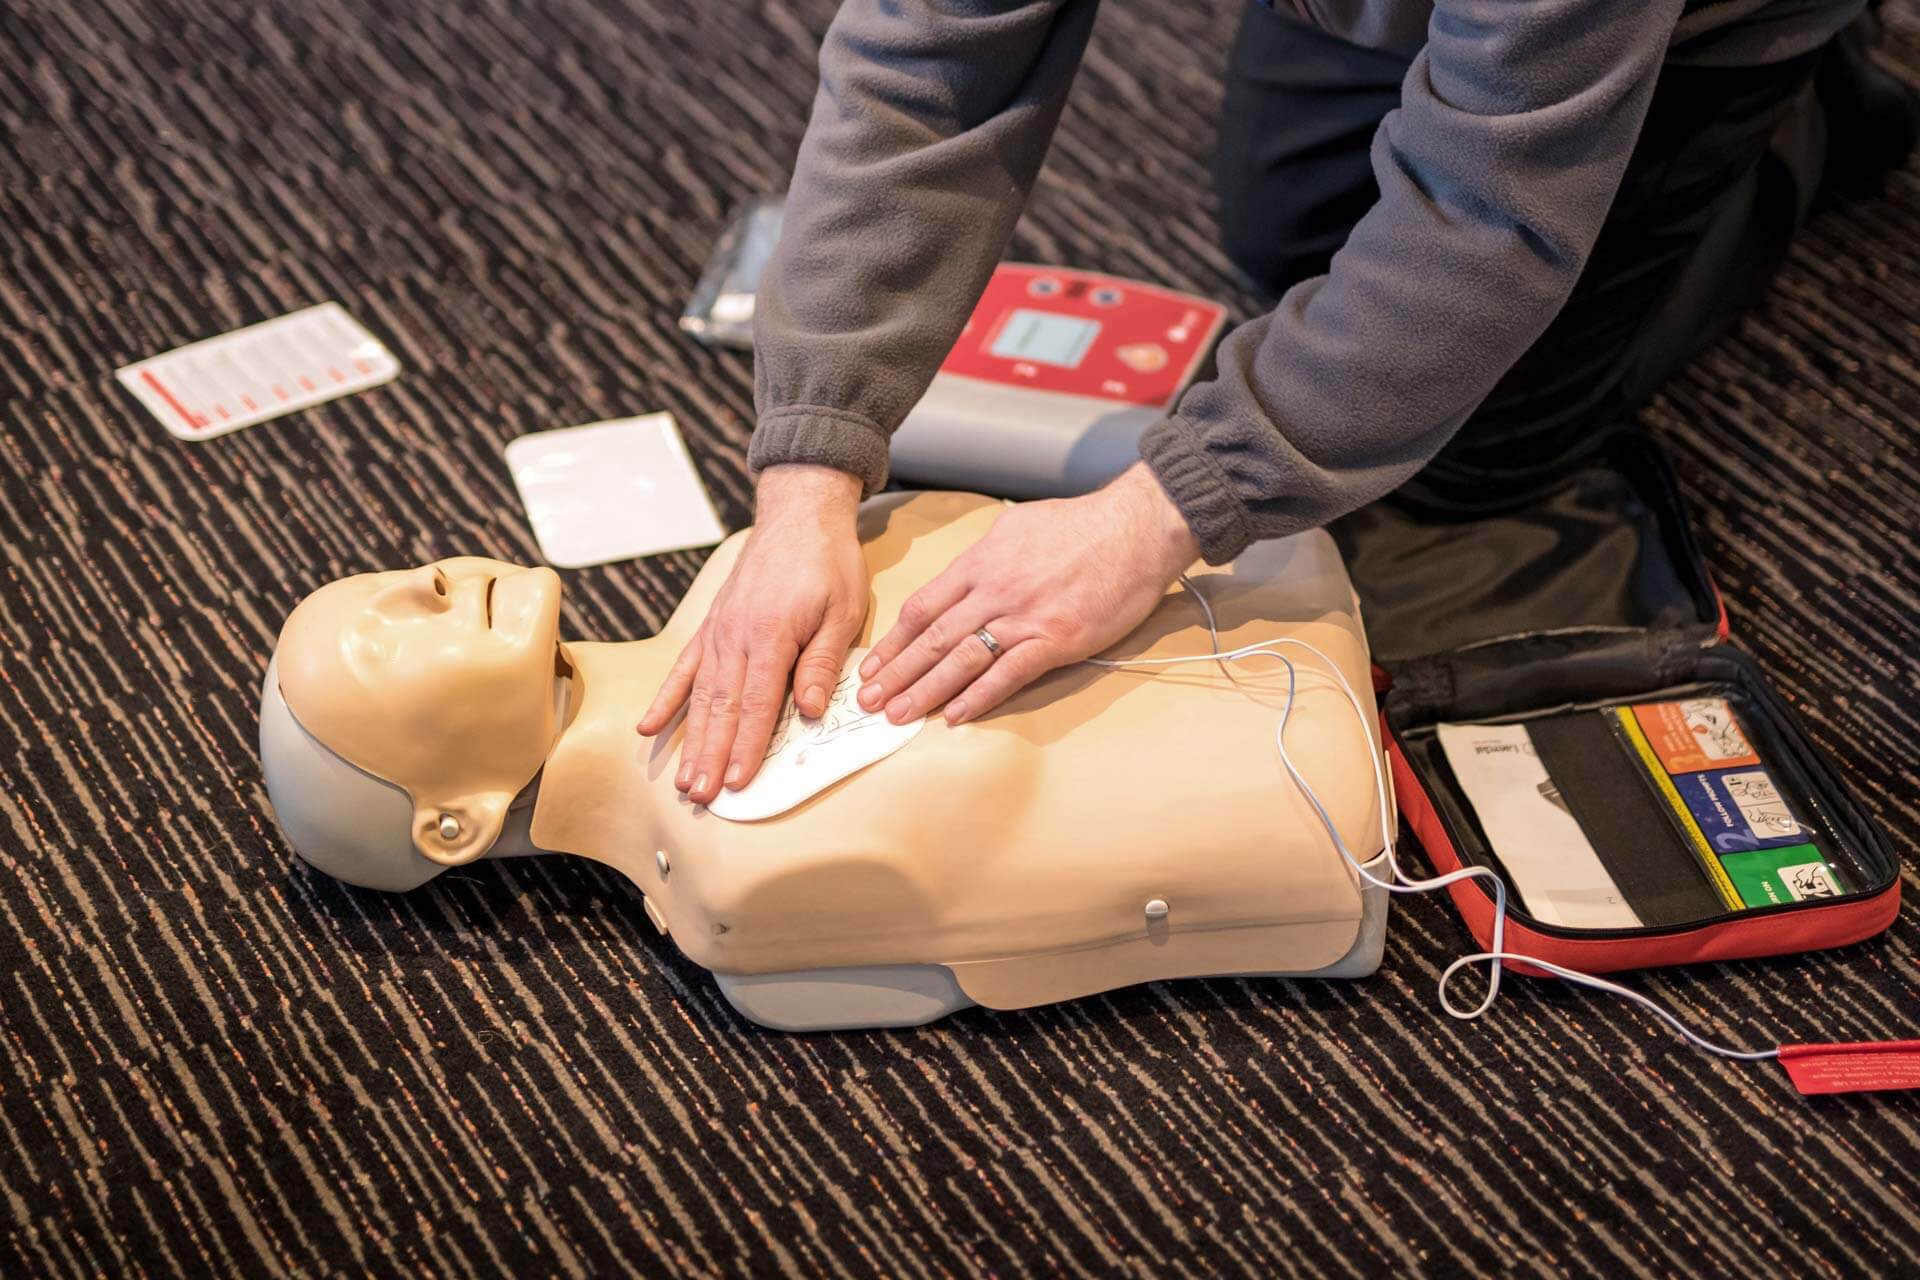 Basic Life Support Community First Aid Training Course